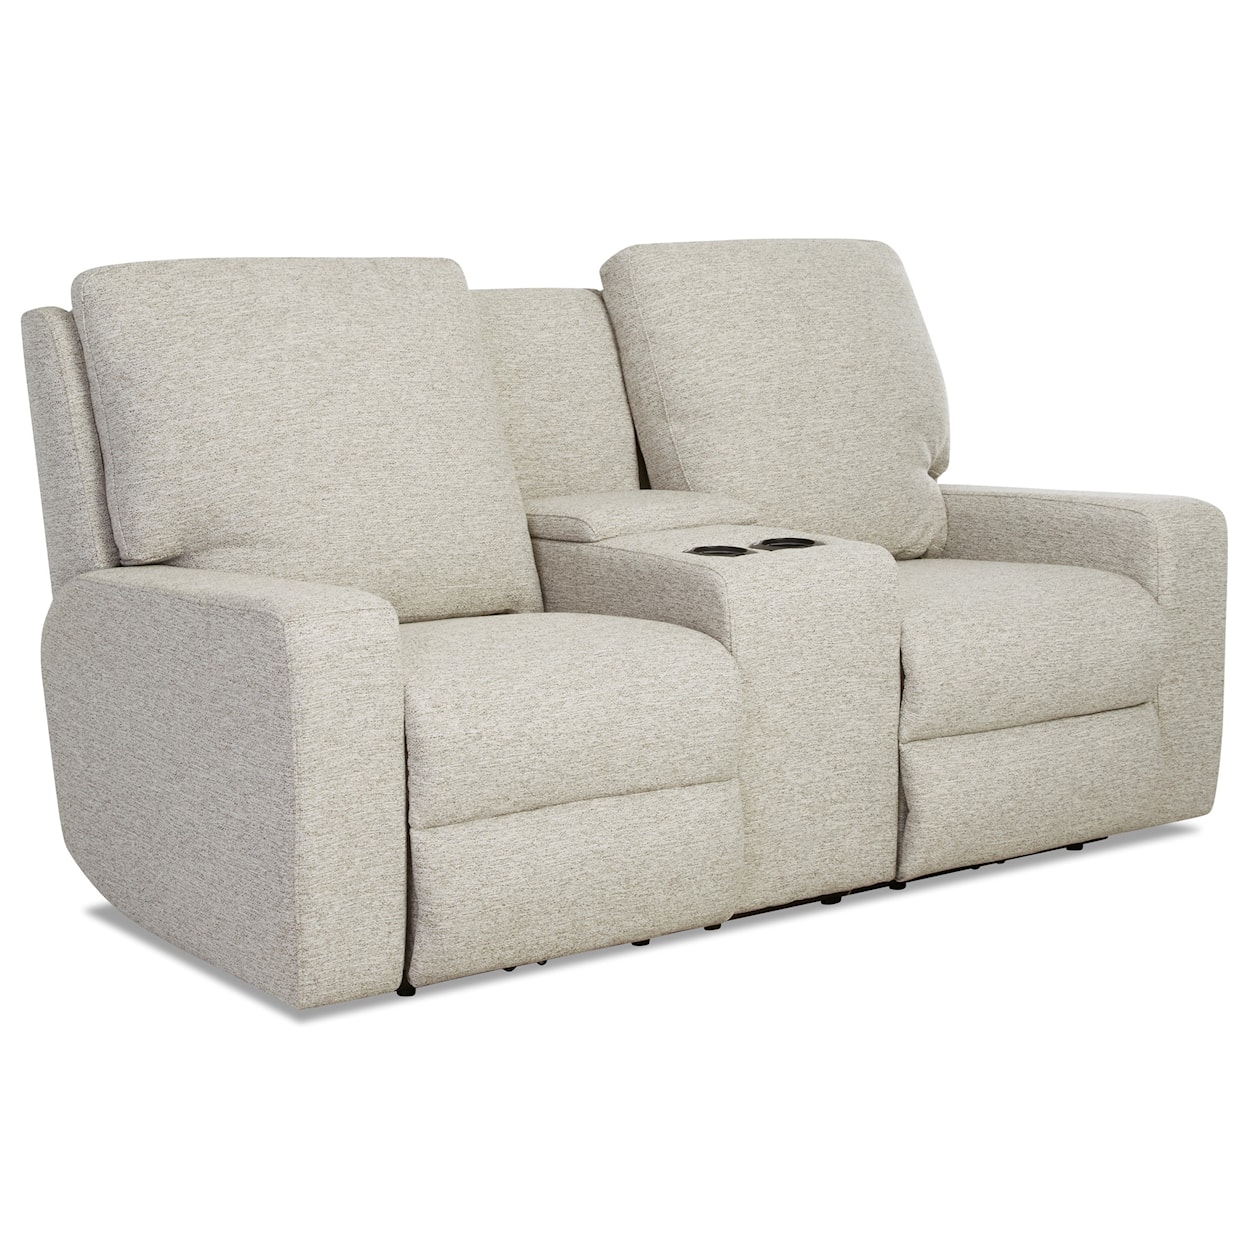 Klaussner Alliser Pwr Recl Loveseat w/ Console & Power Hdrests